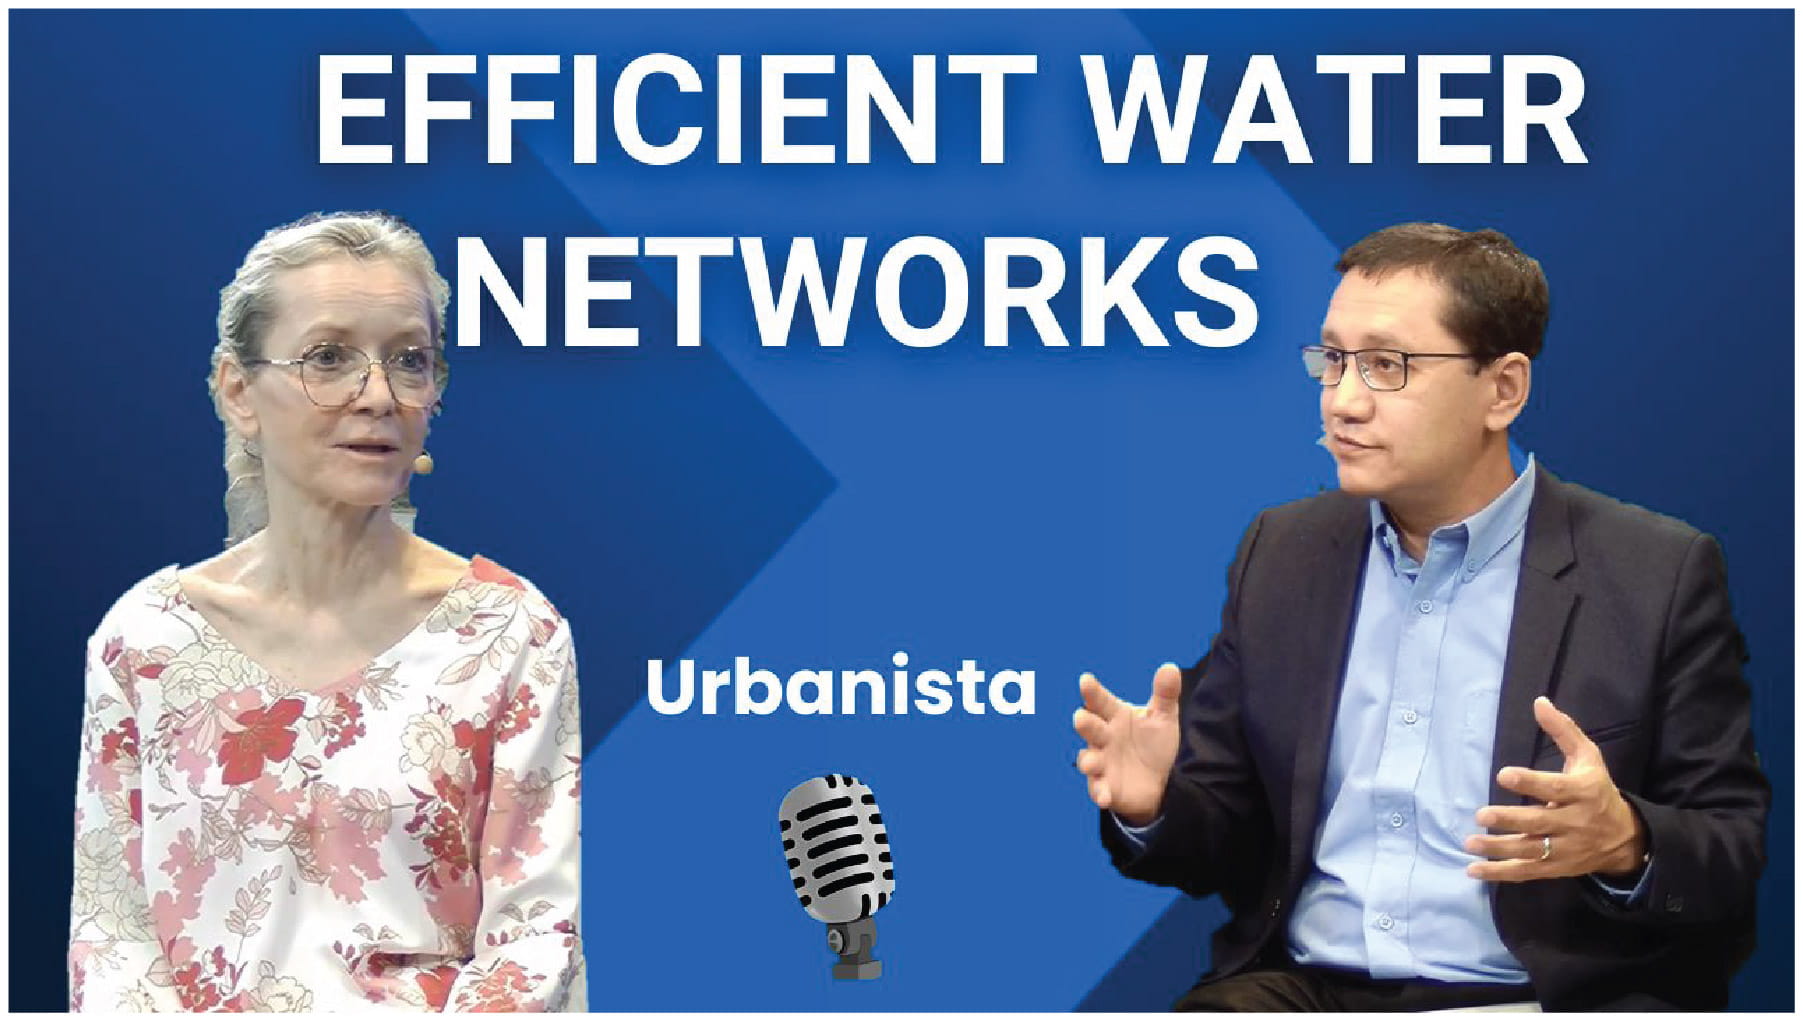 Efficient water networks